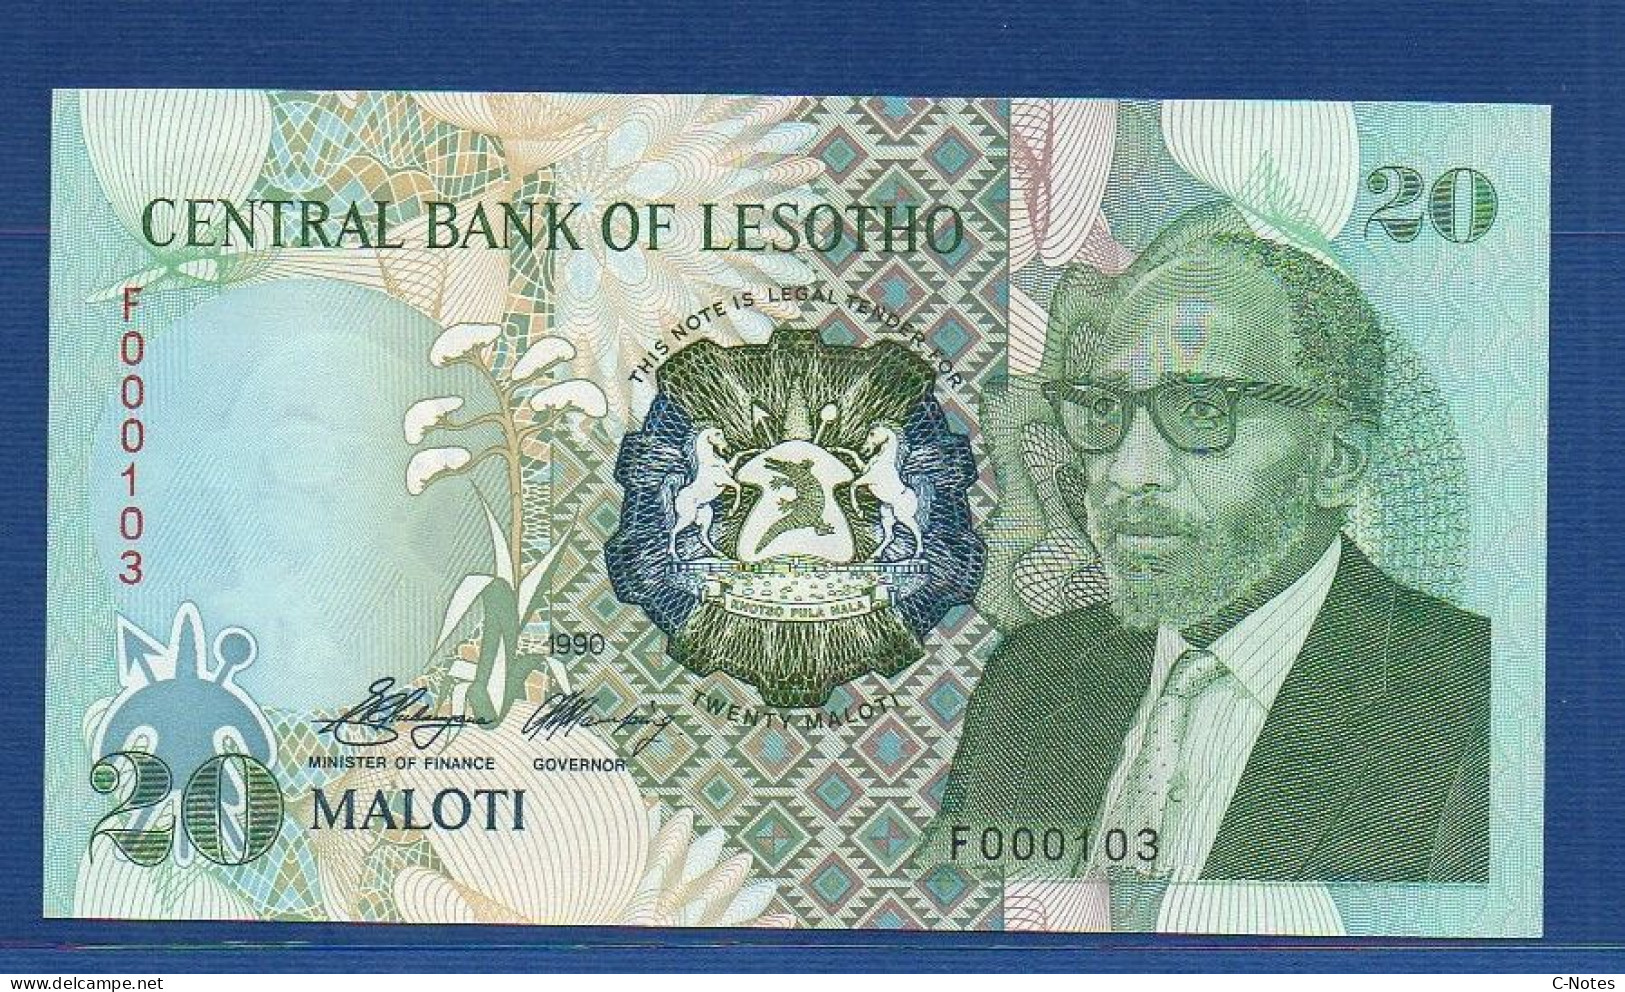 LESOTHO - P.12a – 20 Maloti 1990 UNC, S/n F000103 LOW NUMBER - Lesotho